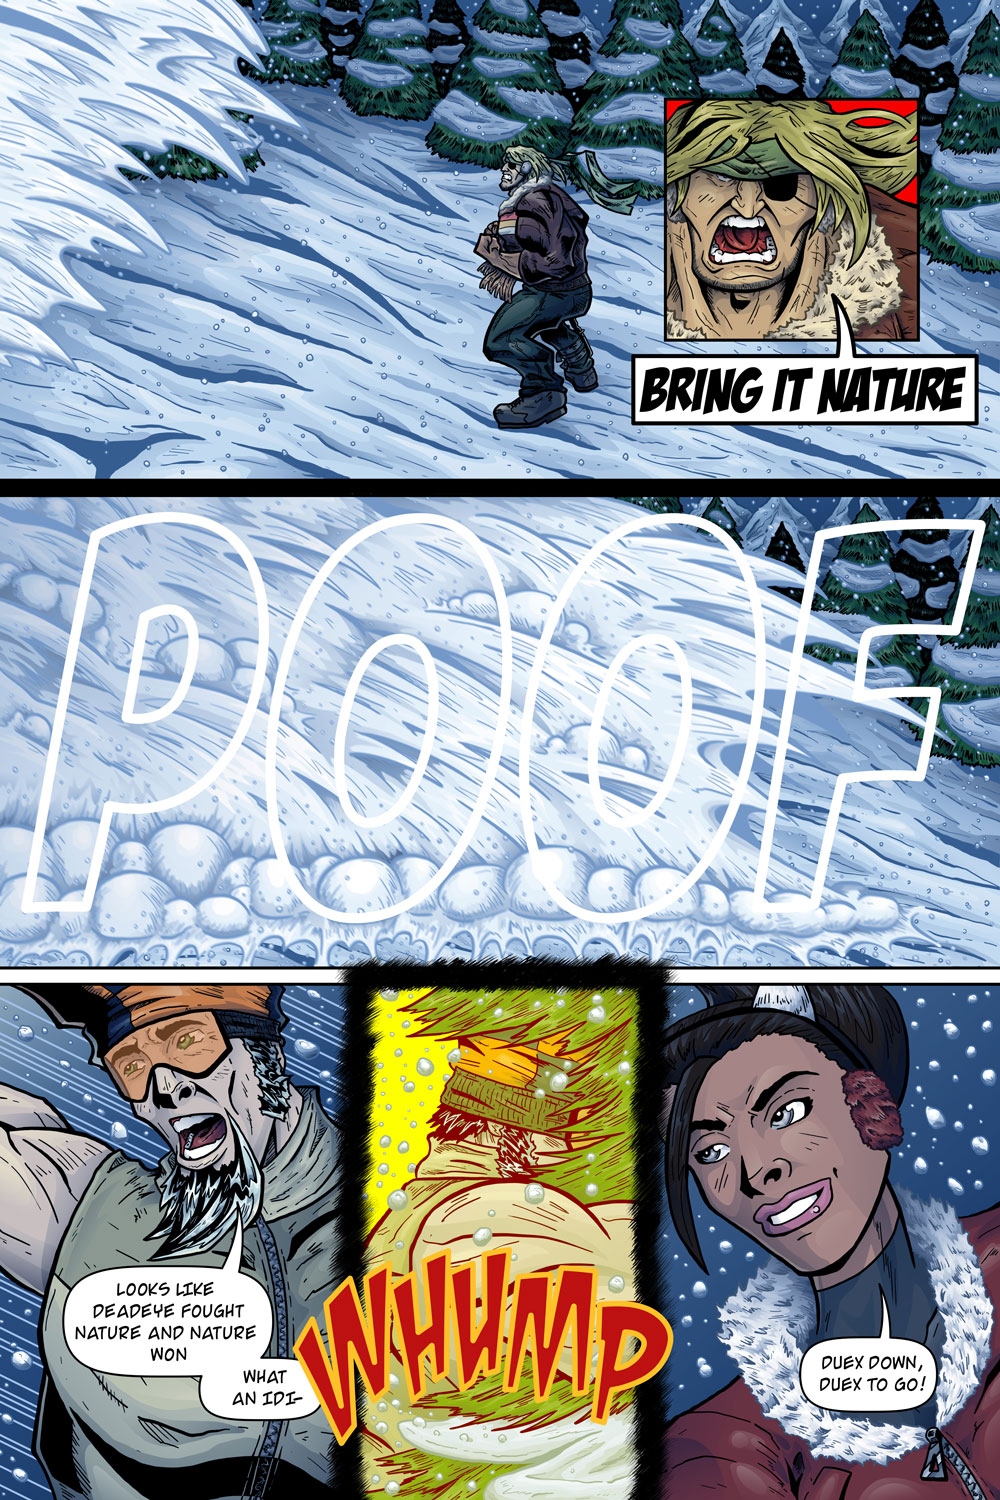 MISSION 012: PAGE 18 “WHUMP”